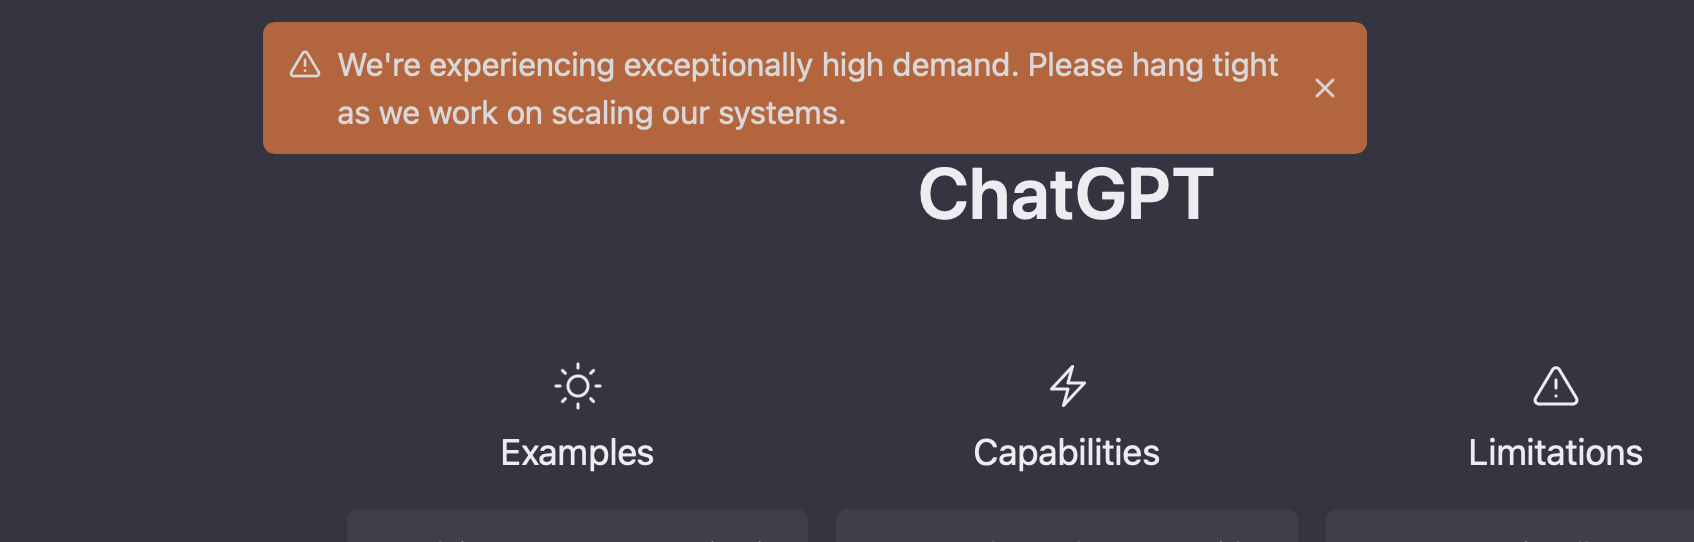 ChatGPT - We're experiencing exceptionally high demand. Please hang tight as we work on scaling our systems.